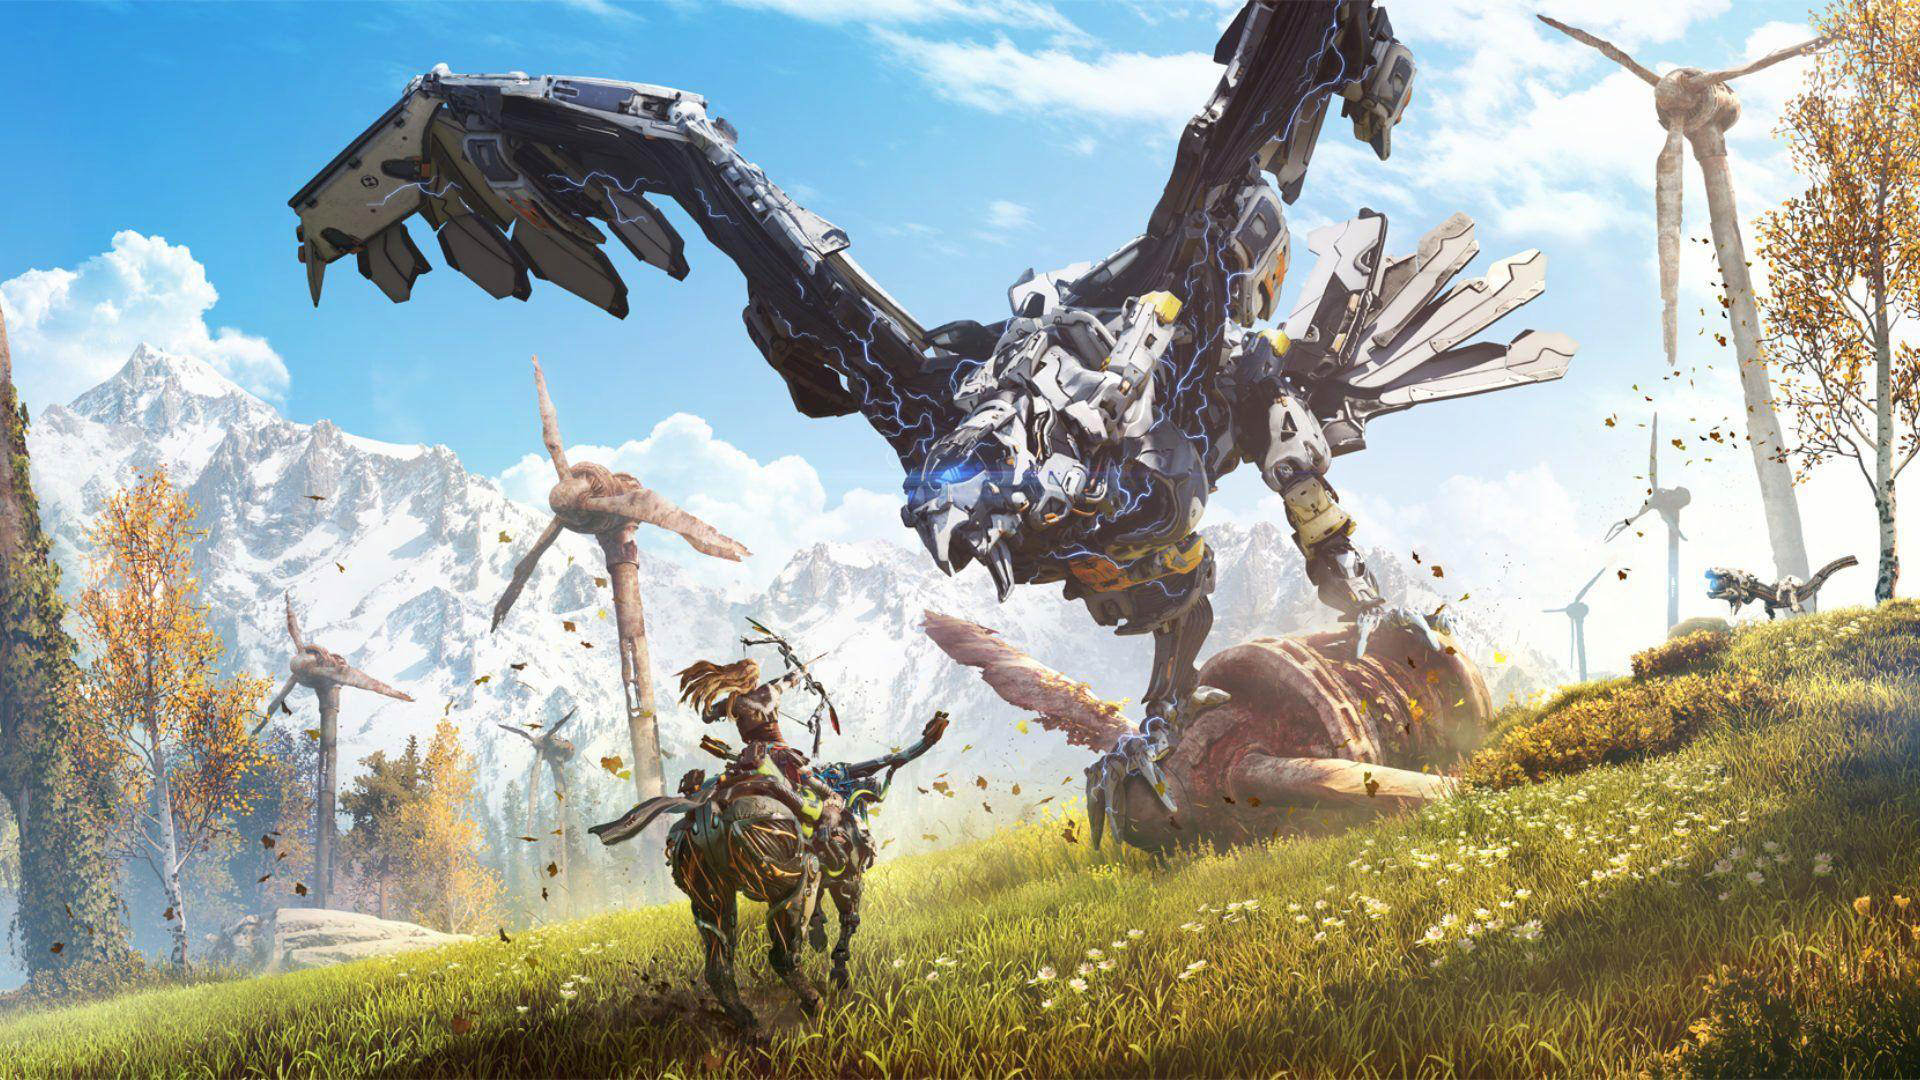 Eloi hunting one of the robots in Horizon Zero Dawn Complete Edition